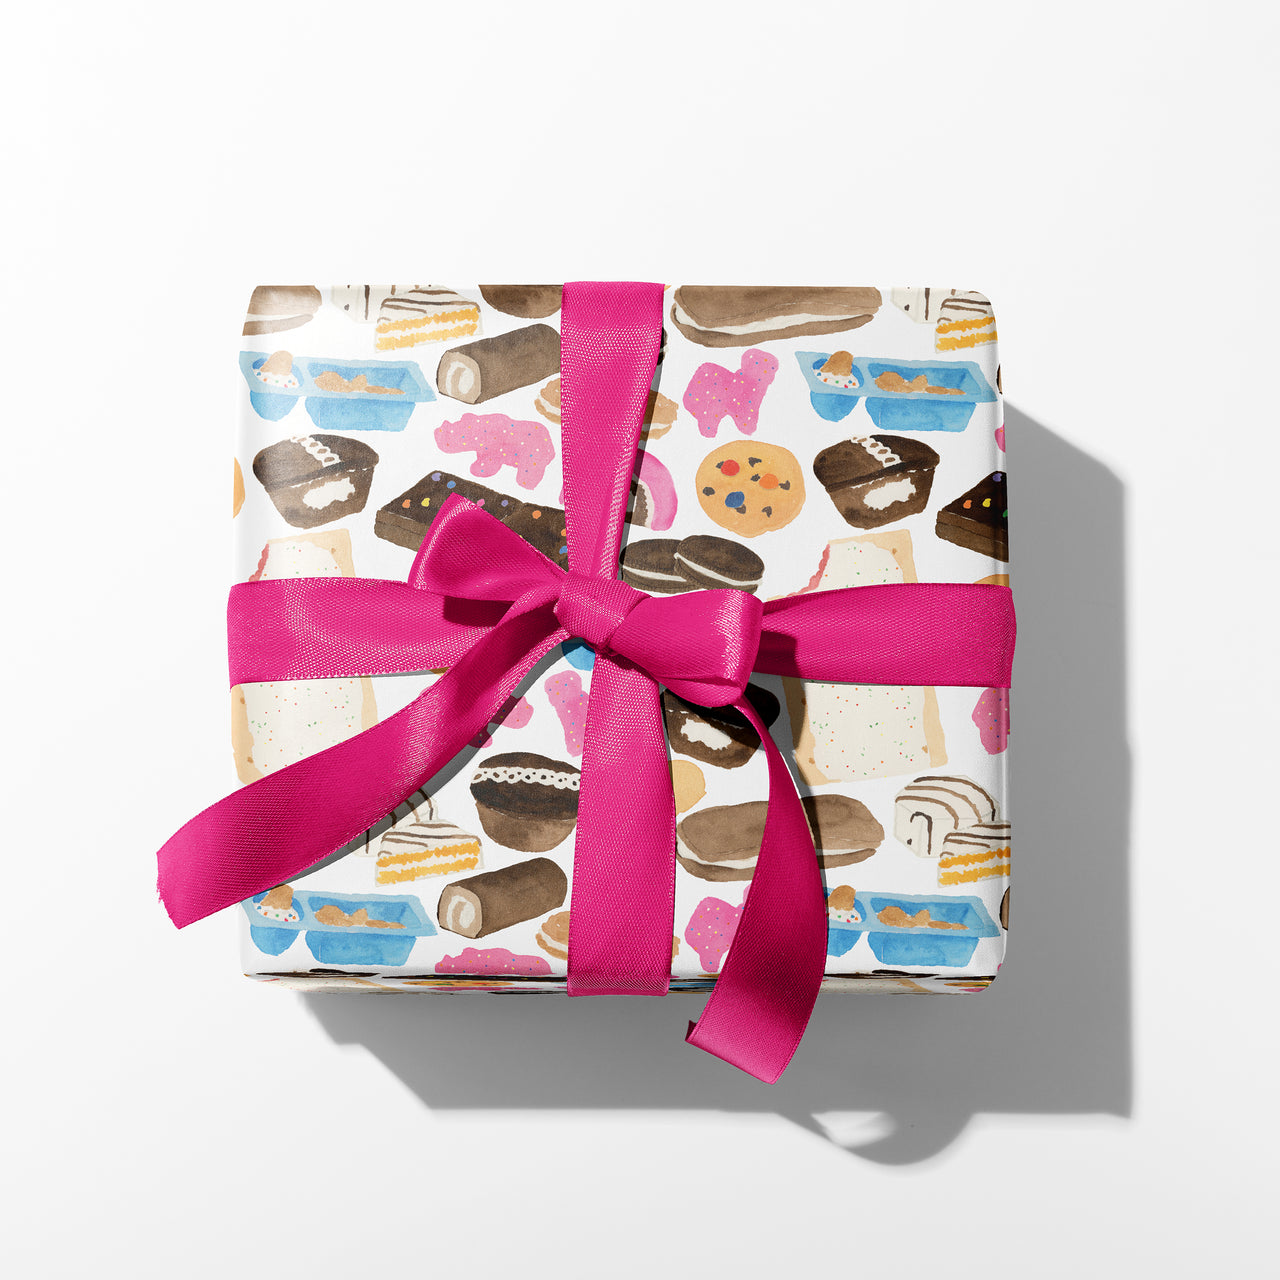 Nostalgic Junk Food Gift Wrap by Gert & Co